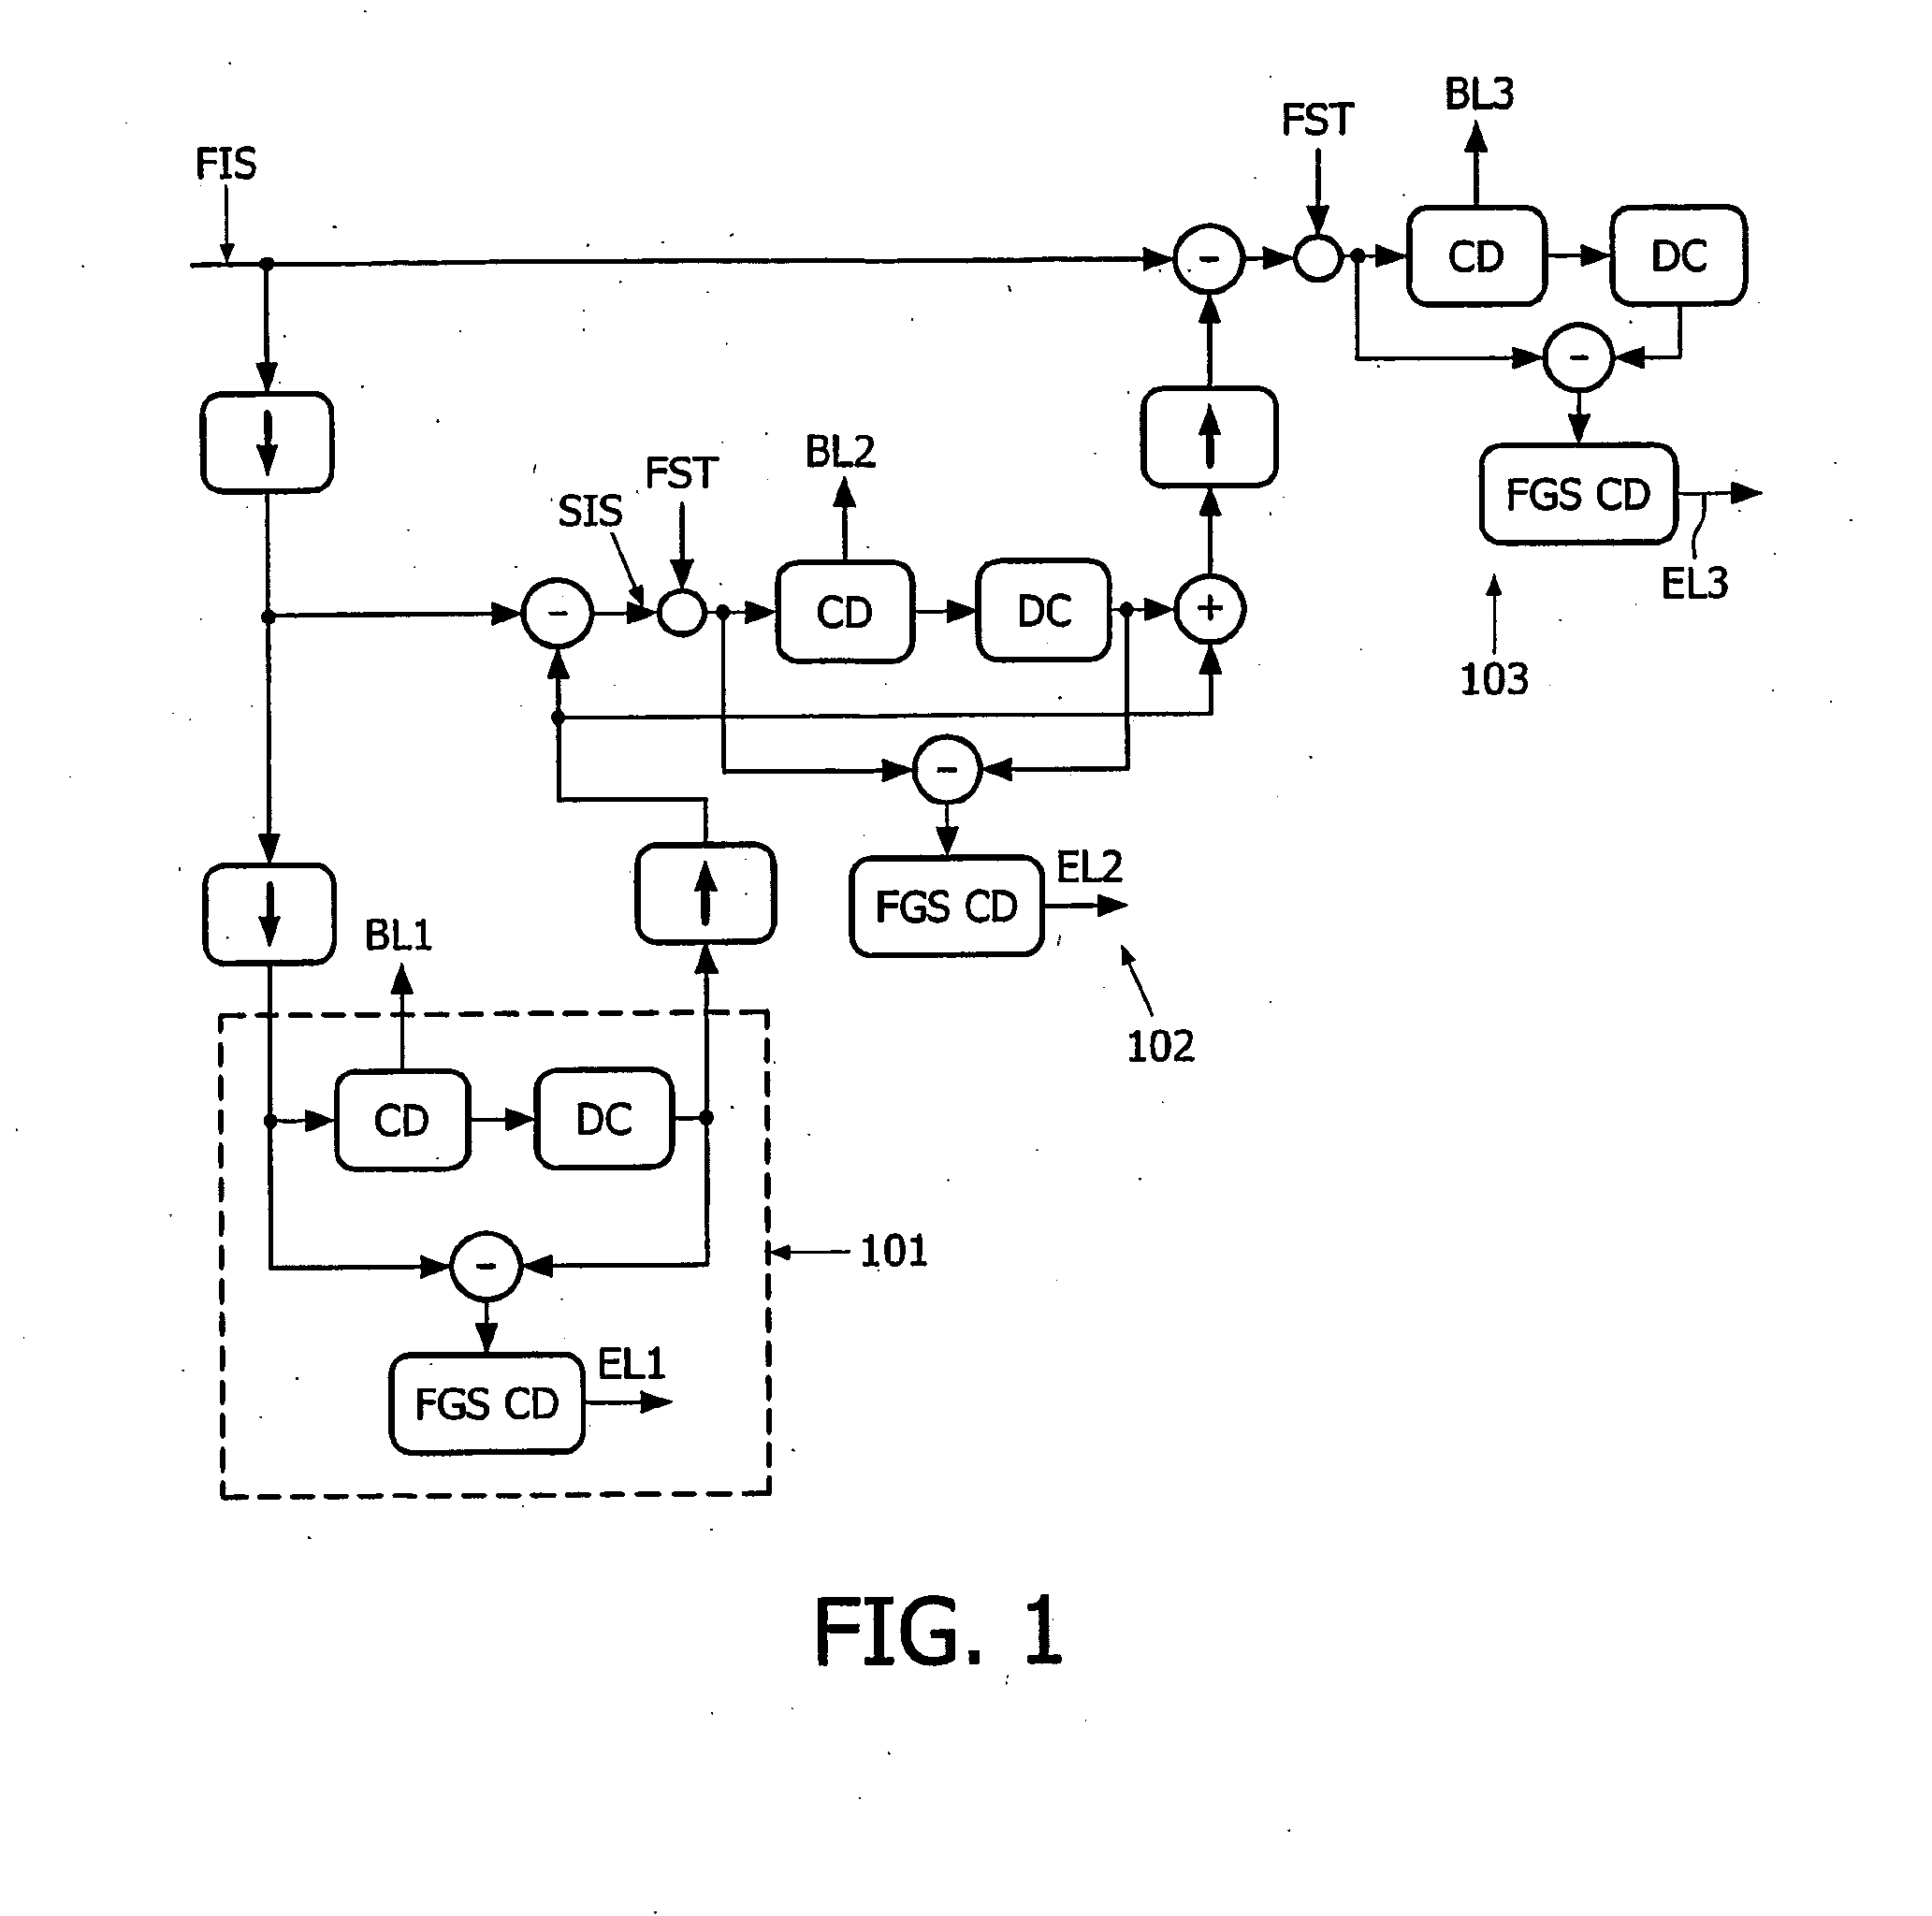 Method of spatial and snr fine granular scalable video encoding and transmission